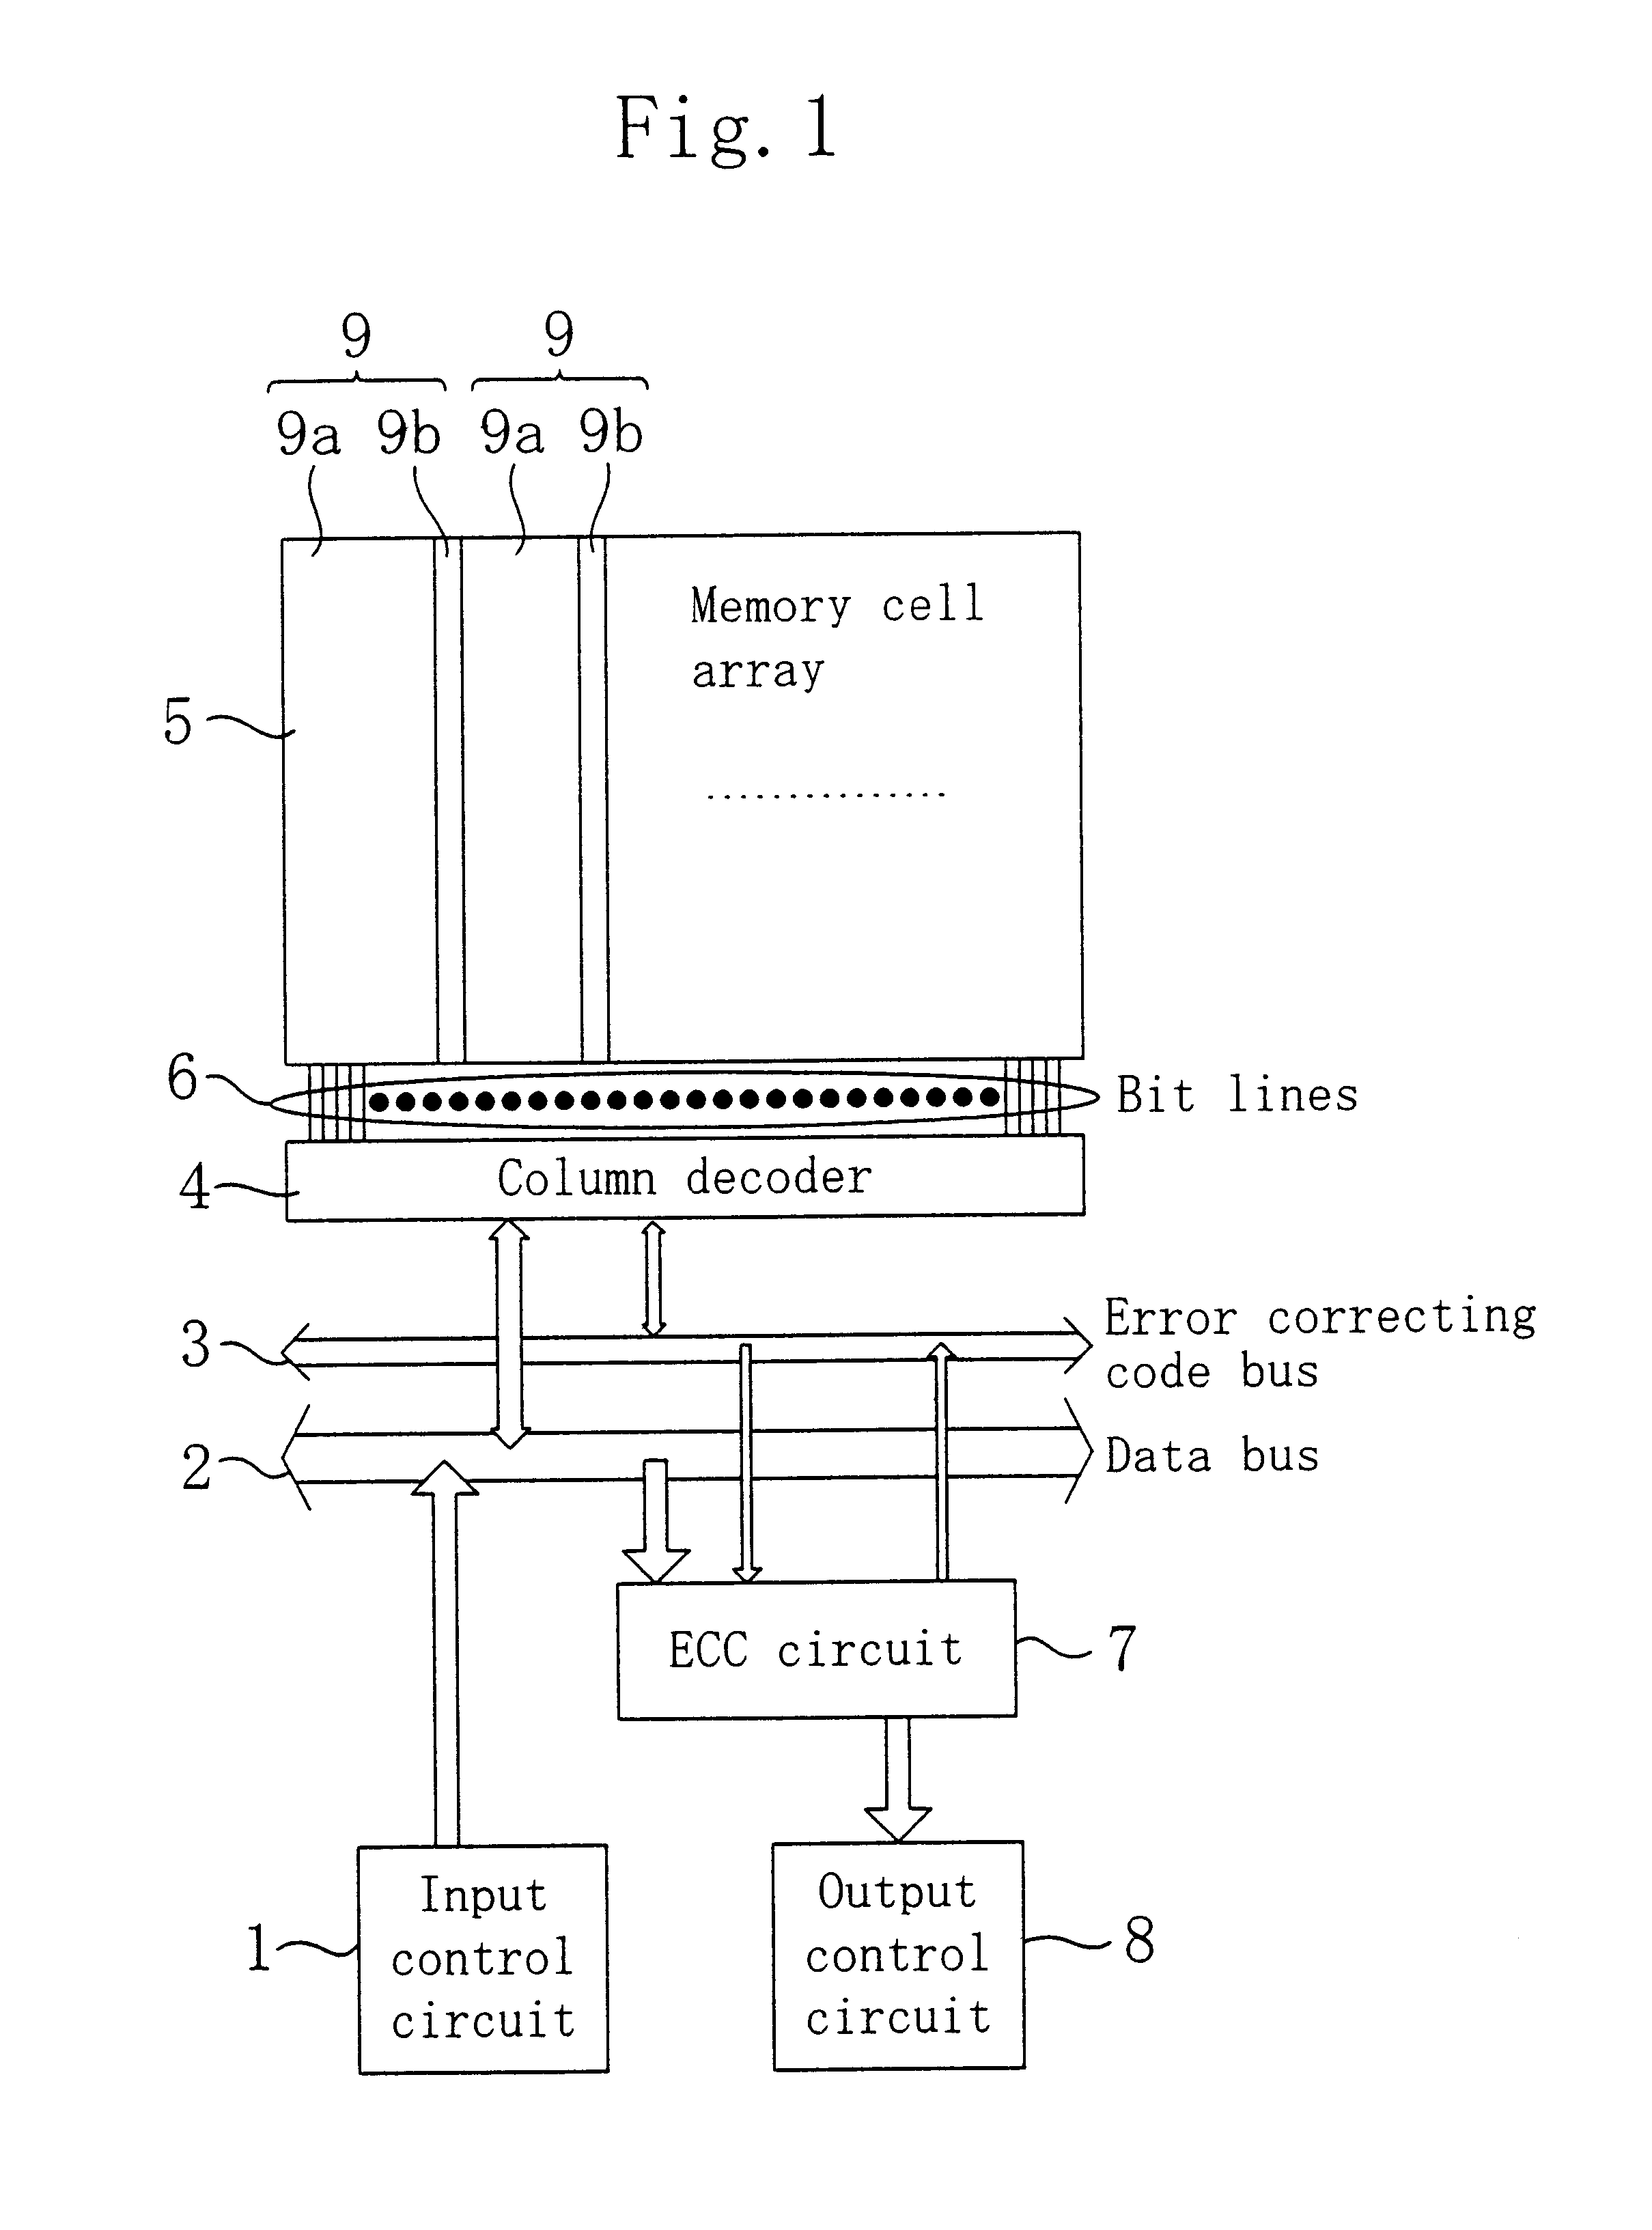 ECC circuit-containing semiconductor memory device and method of testing the same